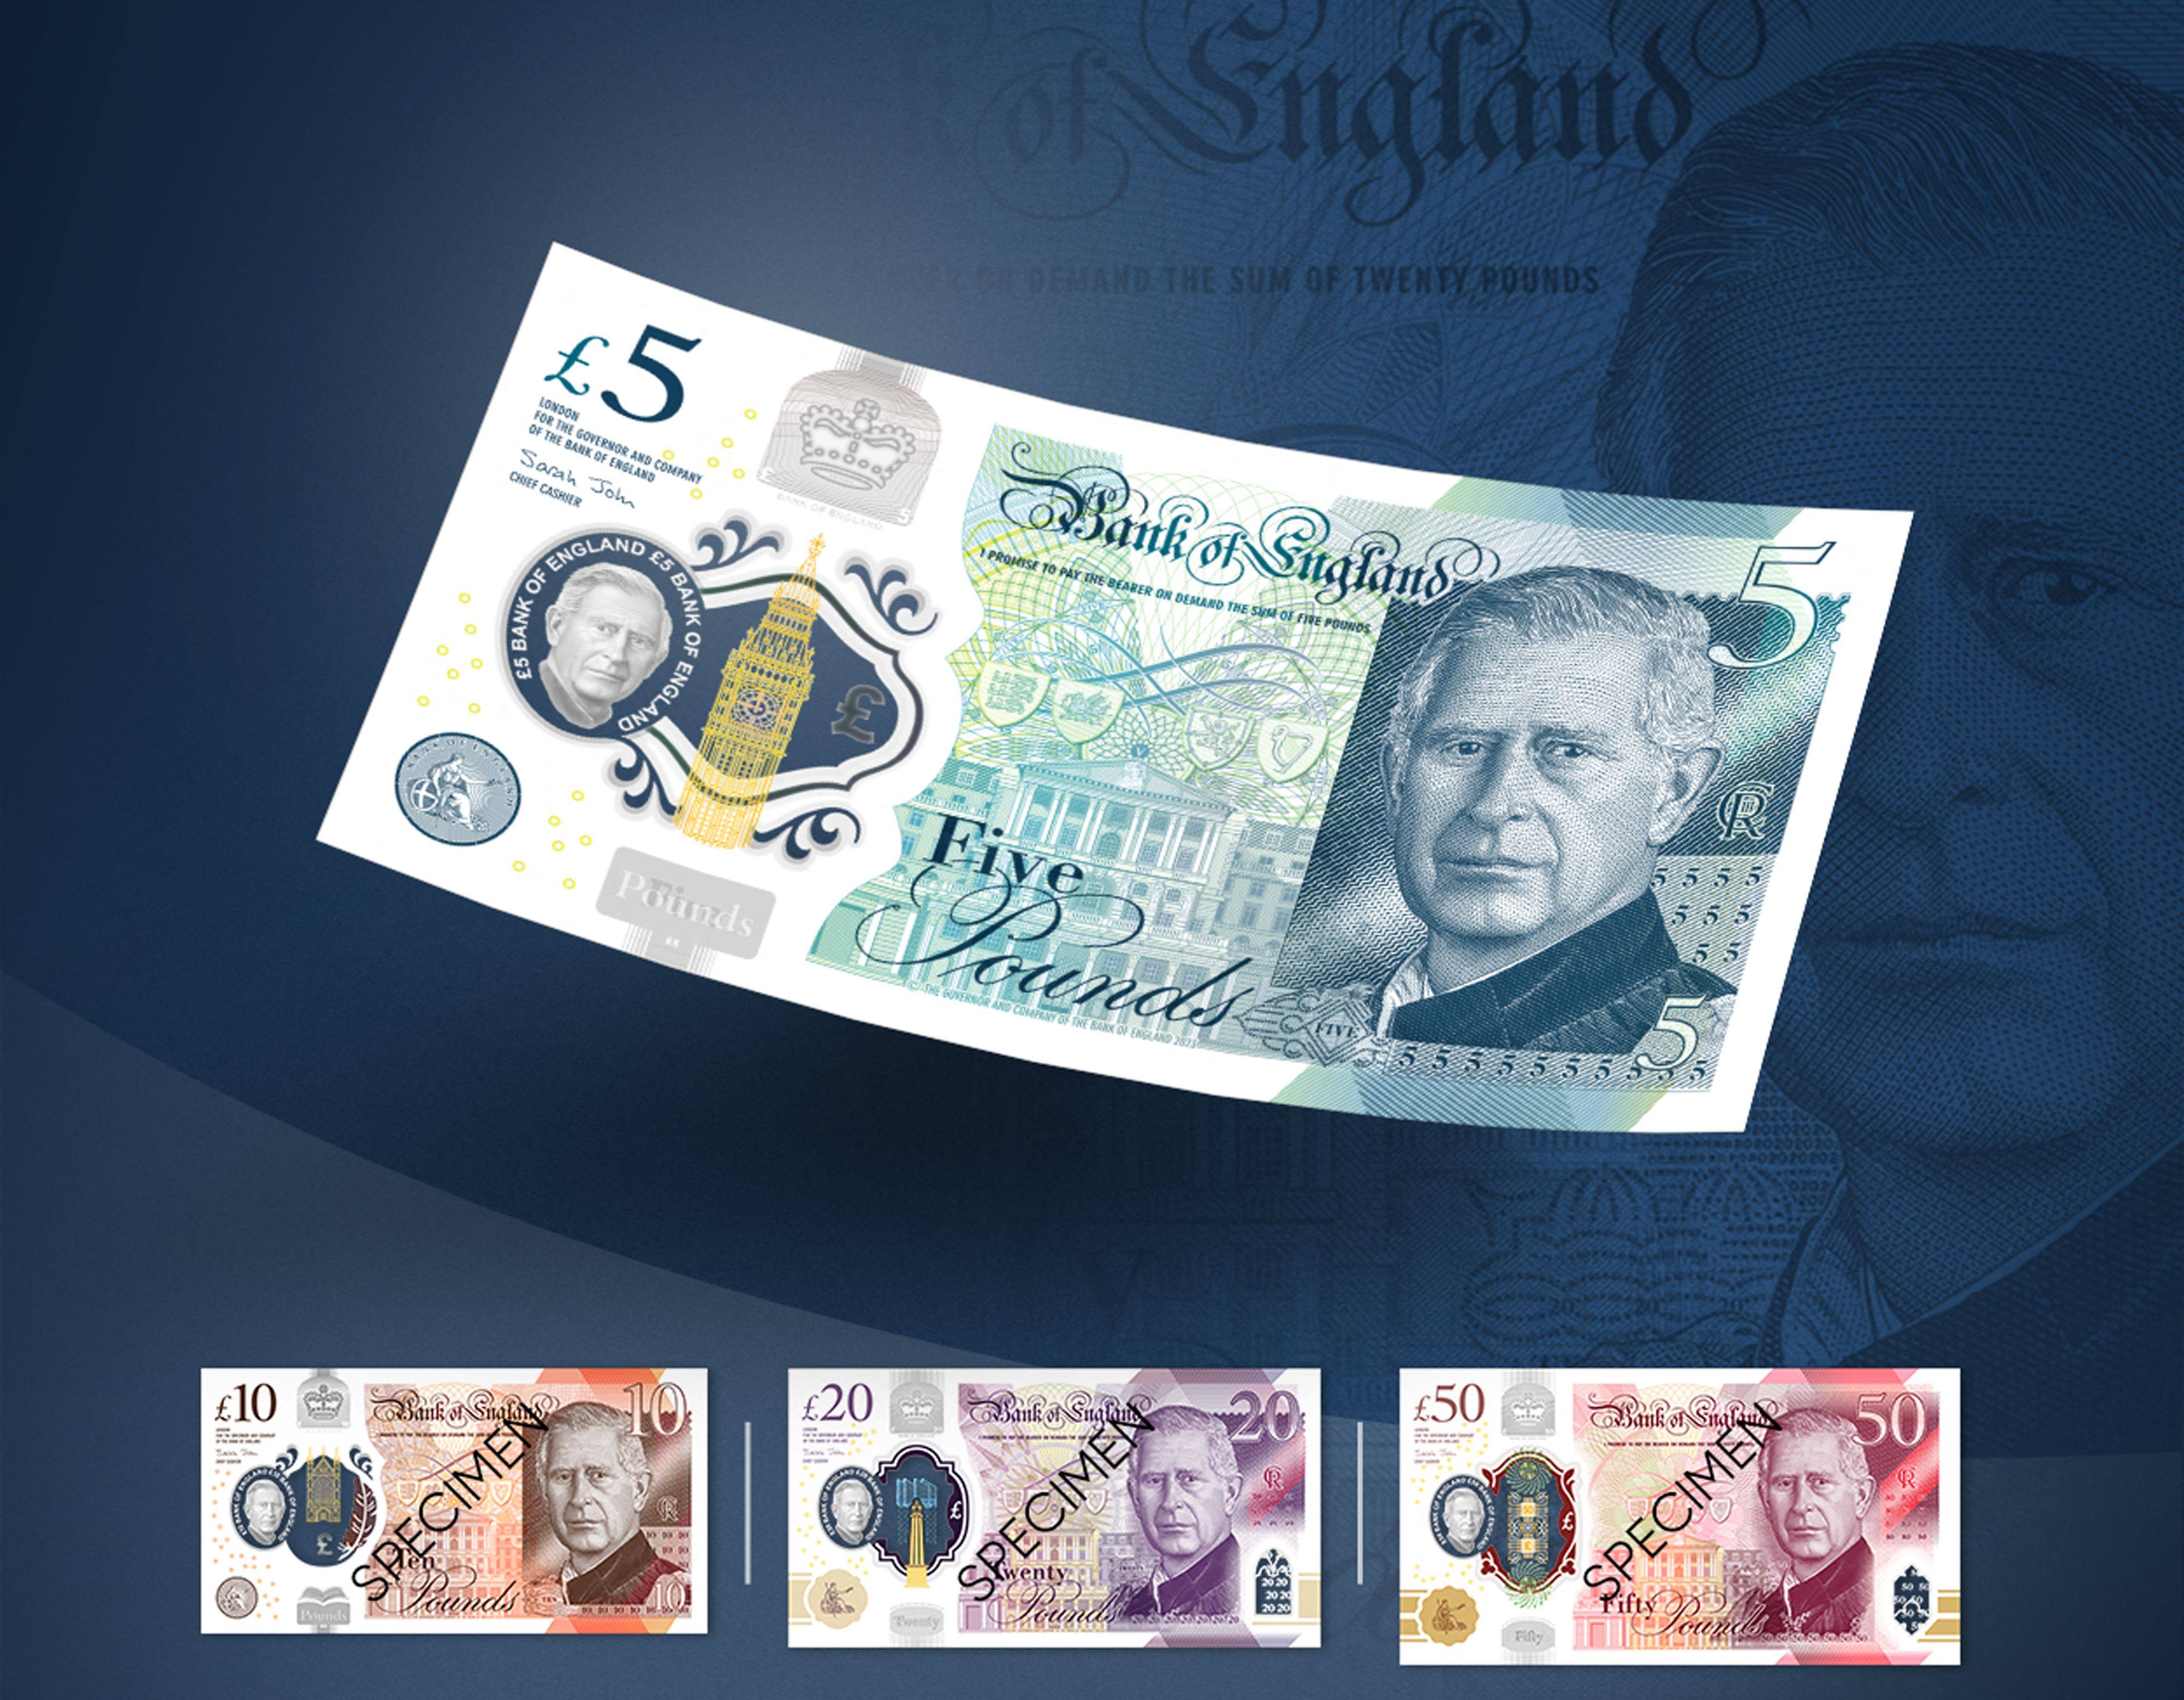 New polymer banknotes featuring Britain’s King Charles will enter circulation in June. Photo: Bank of England/AFP/Handout